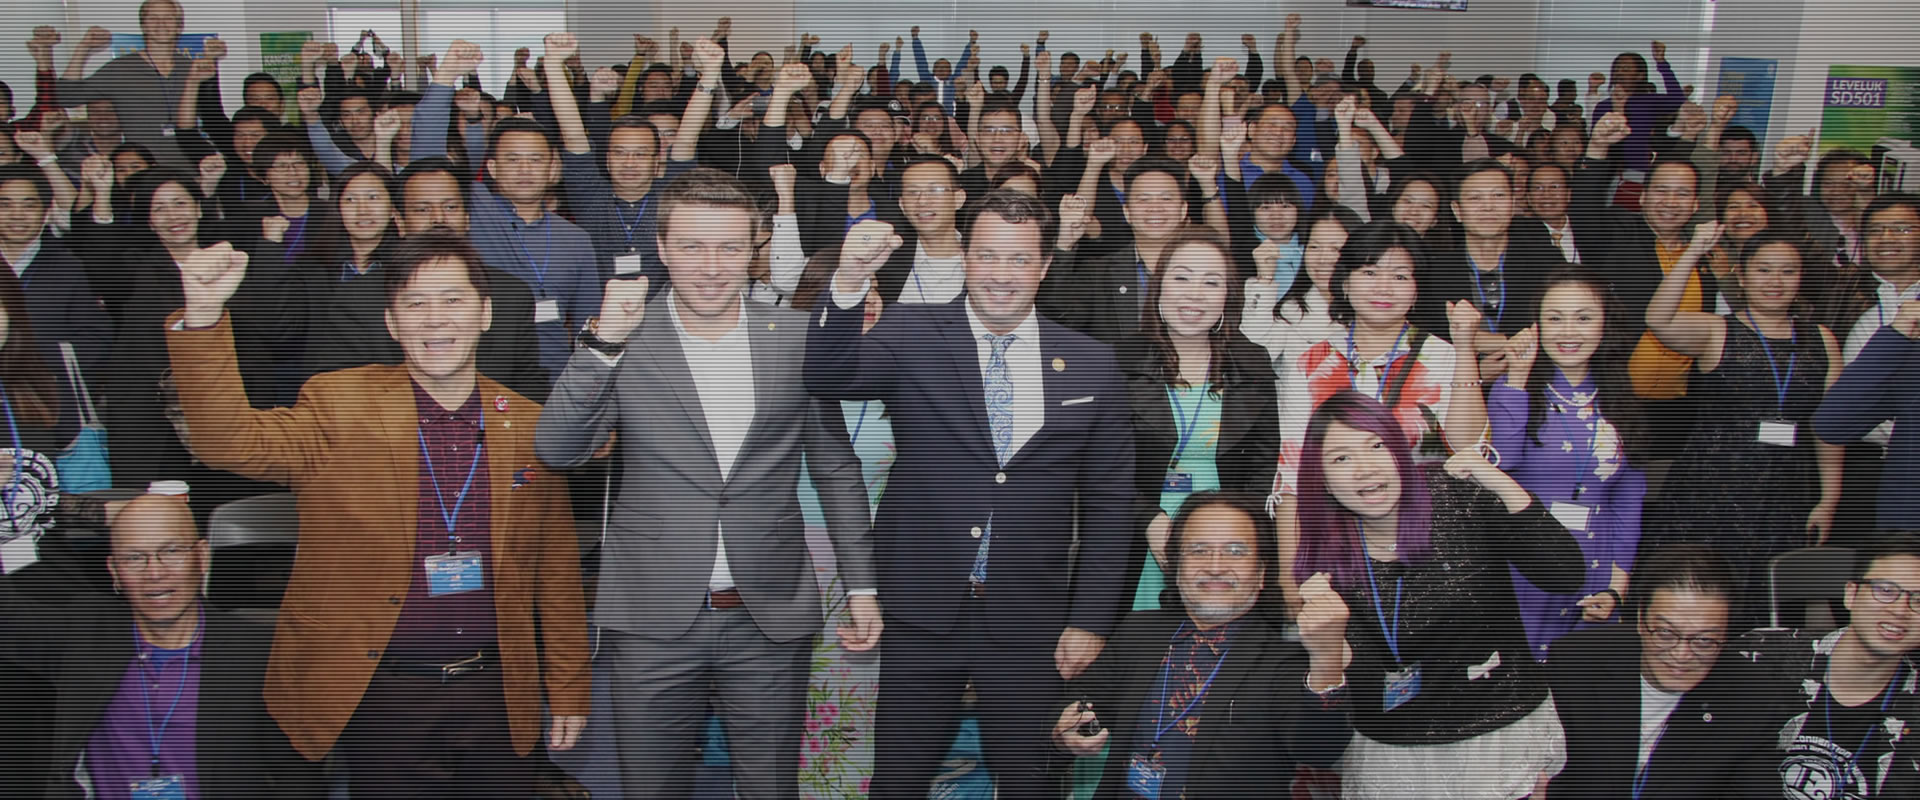 2018 E8PA GLOBAL CONVENTION in Okinawa